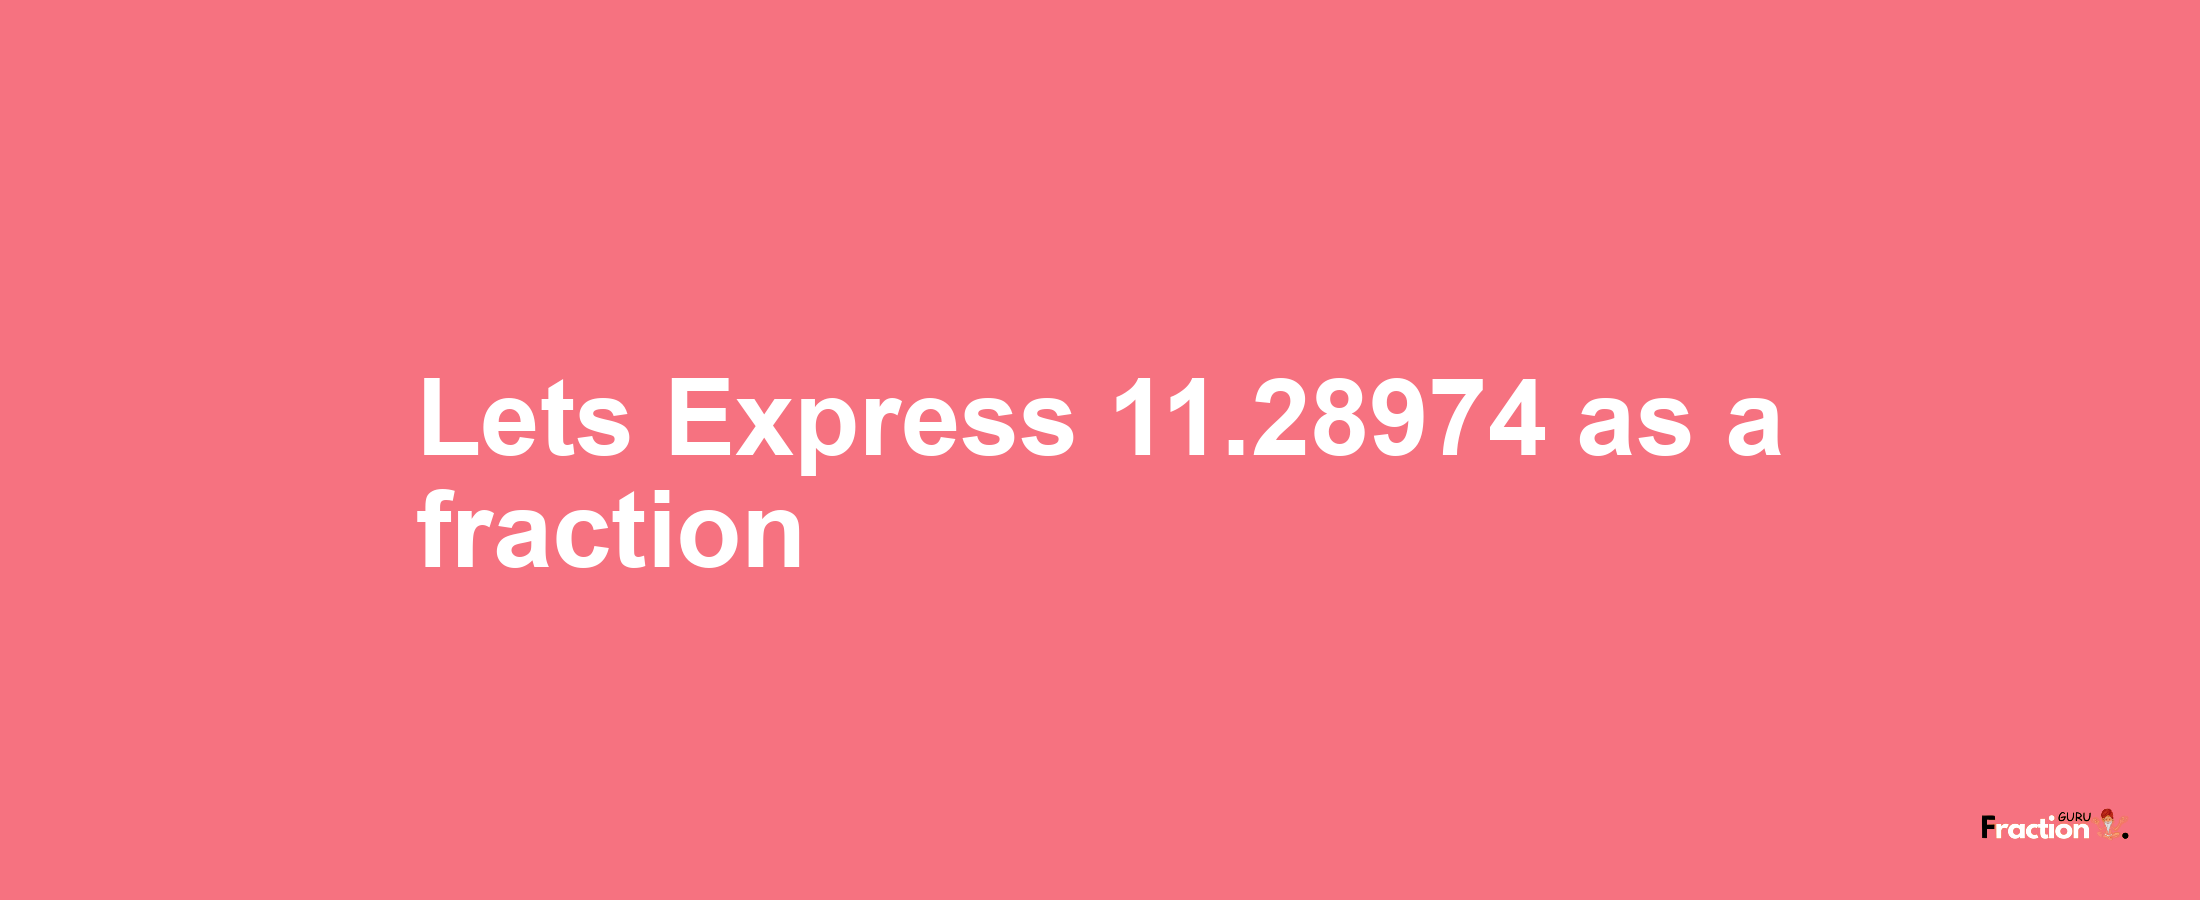 Lets Express 11.28974 as afraction